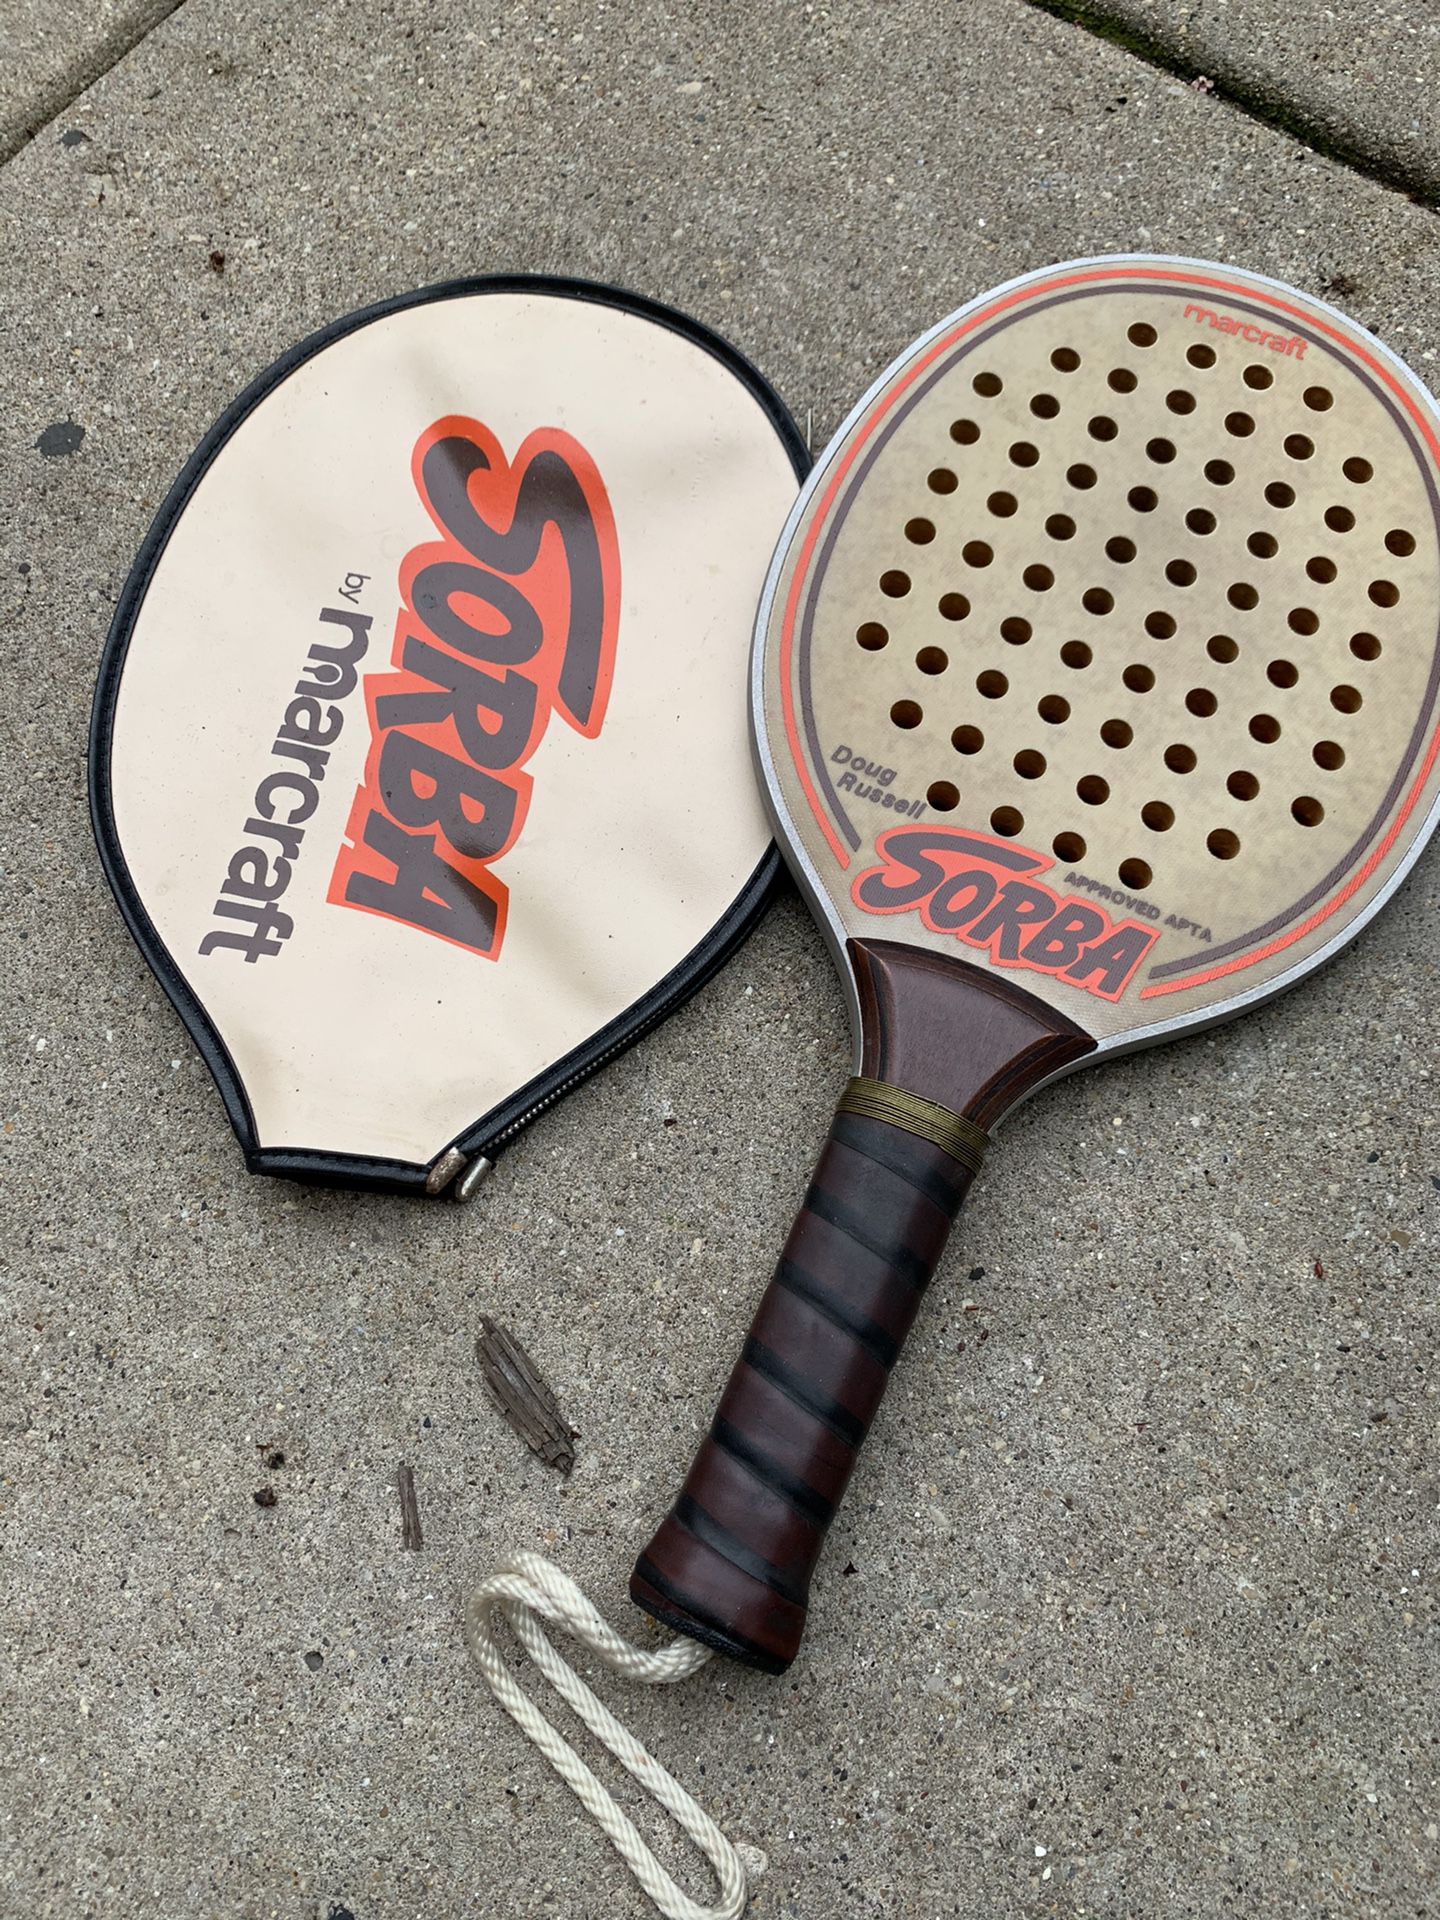 Authentic Sorba tennis paddle racket by Marcraft for Doug Russell made in the USA with matching case